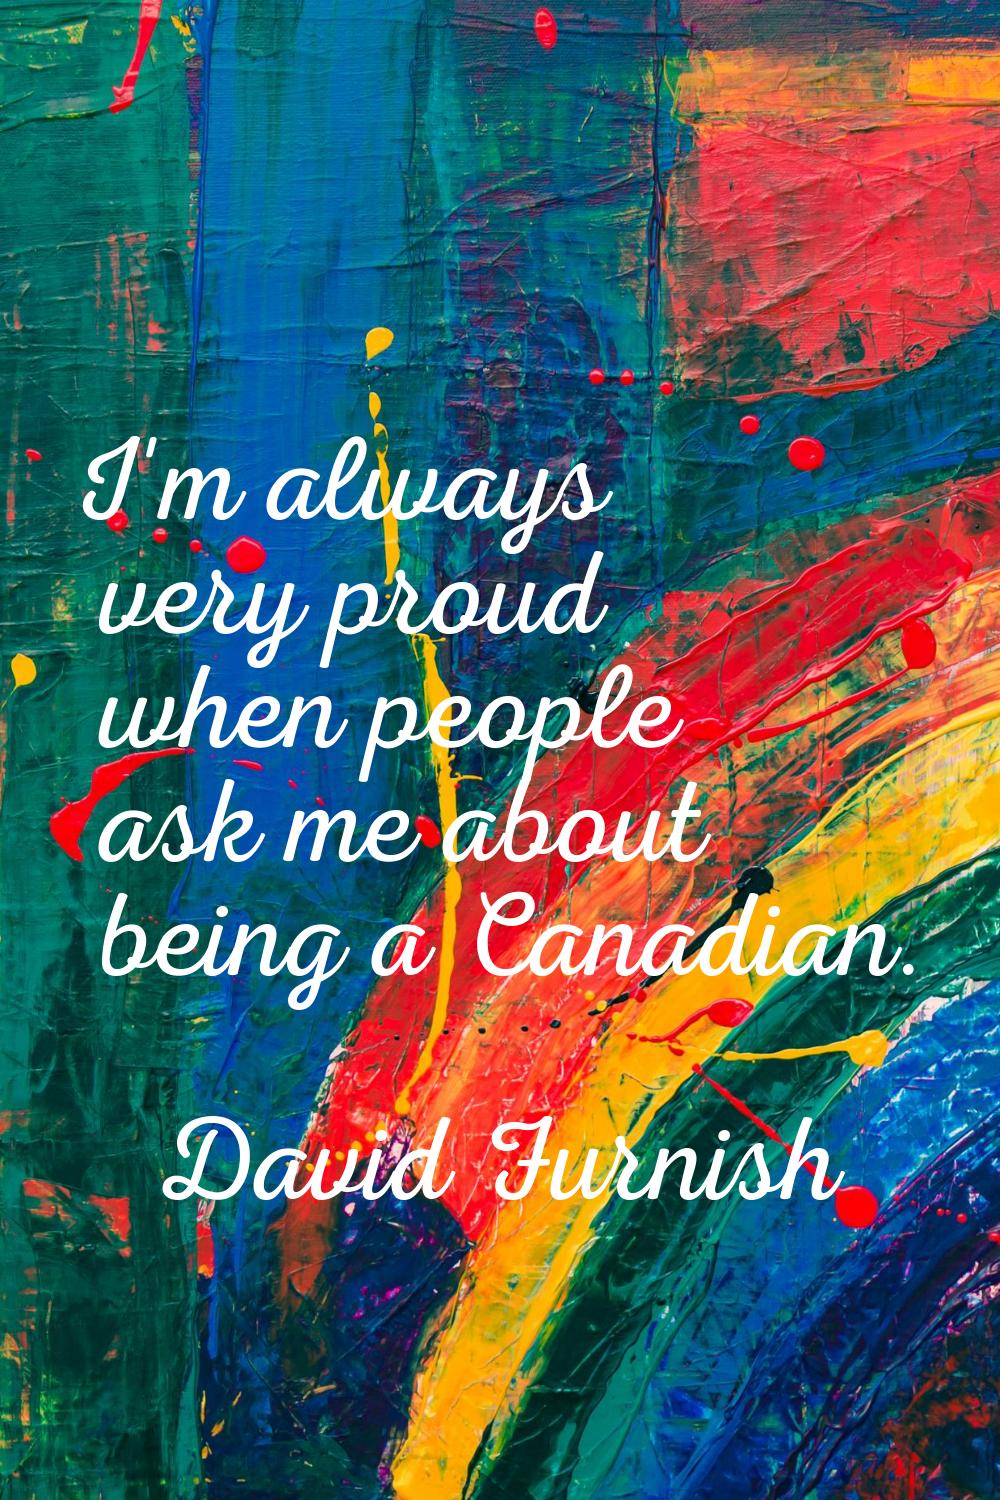 I'm always very proud when people ask me about being a Canadian.